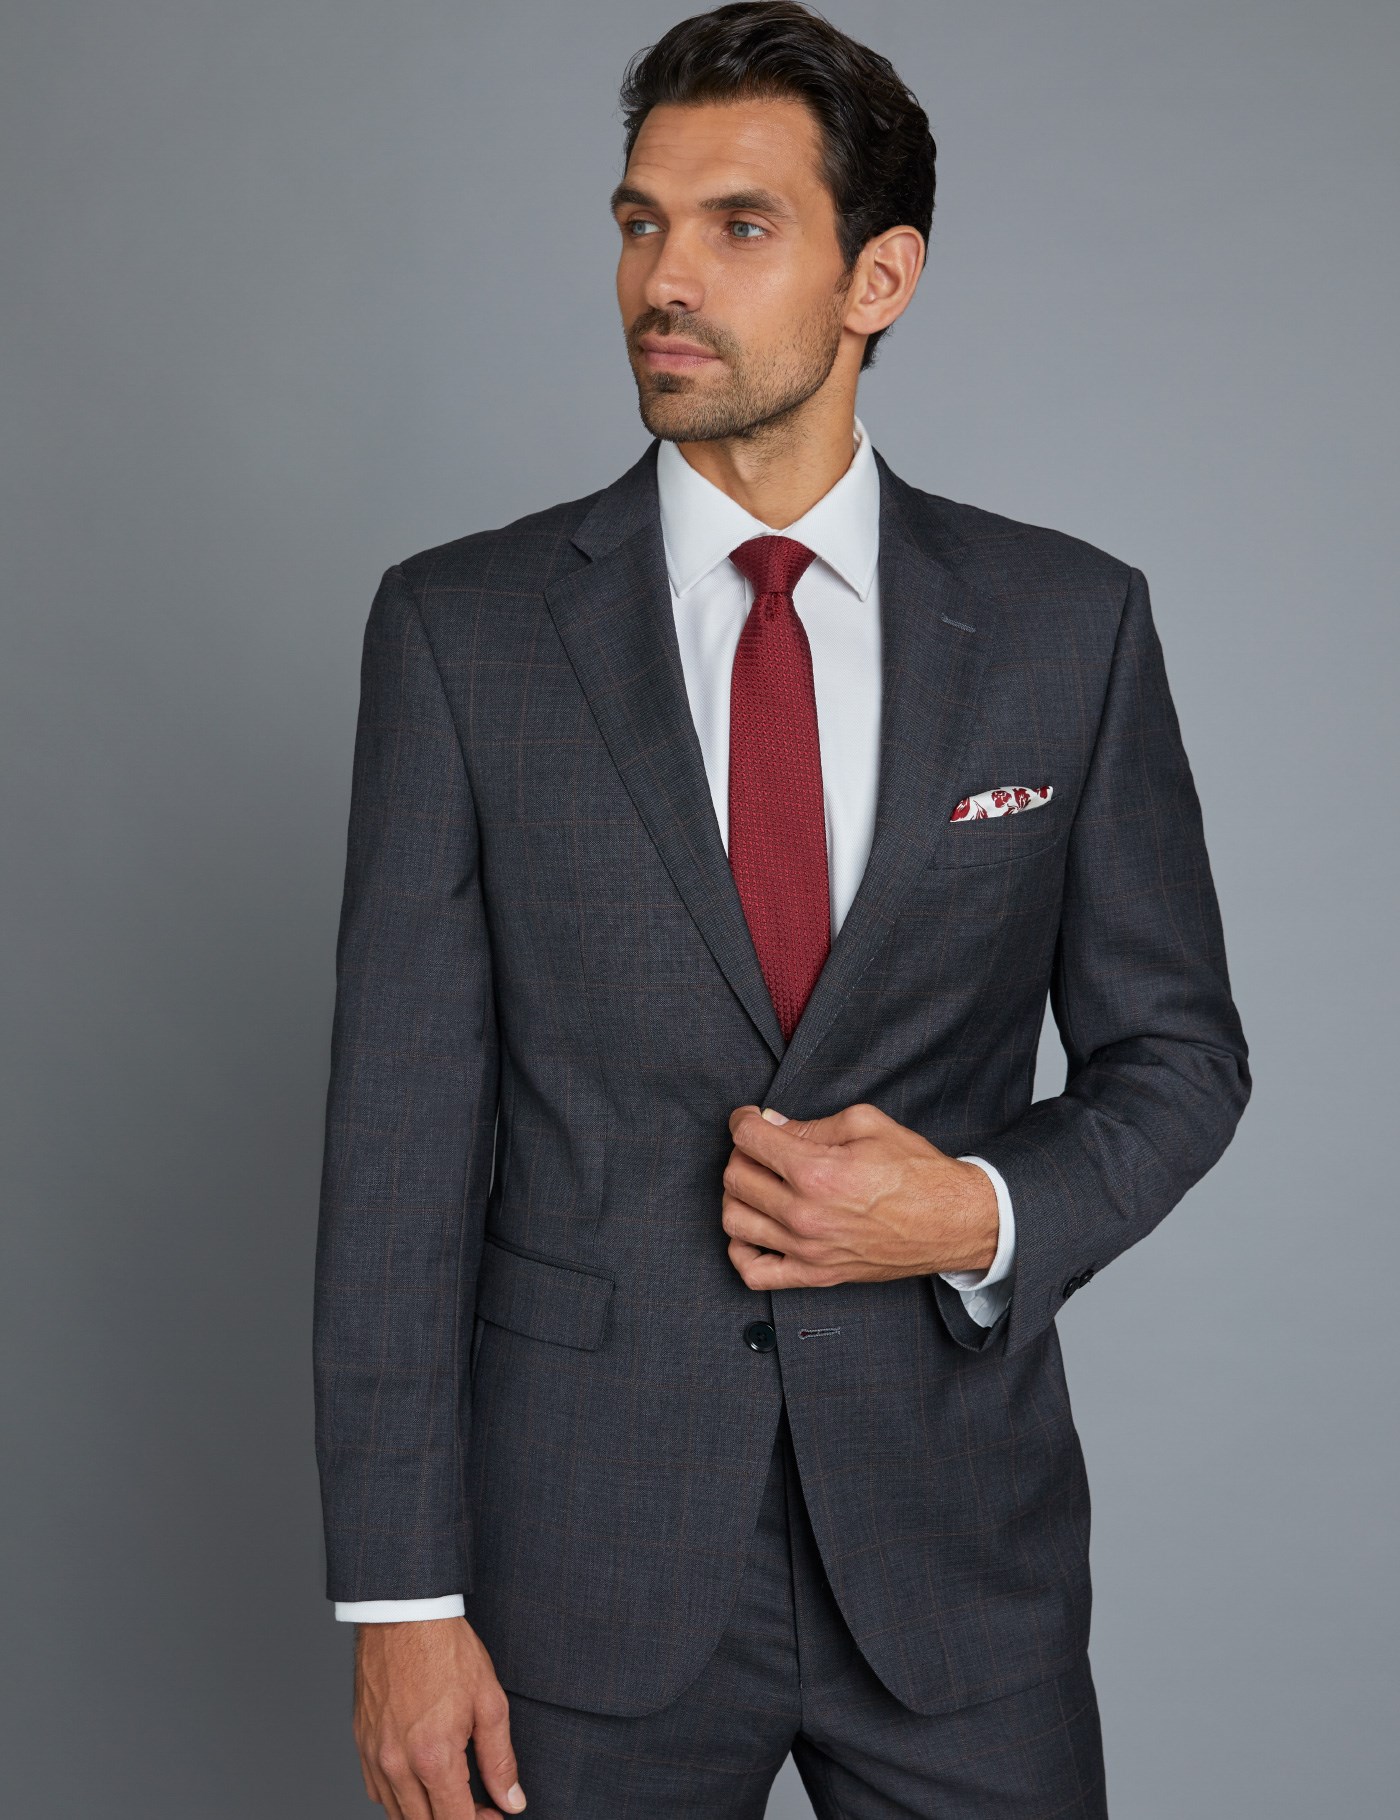 Men's Grey & Red Windowpane Classic Fit Suit Jacket | Hawes & Curtis